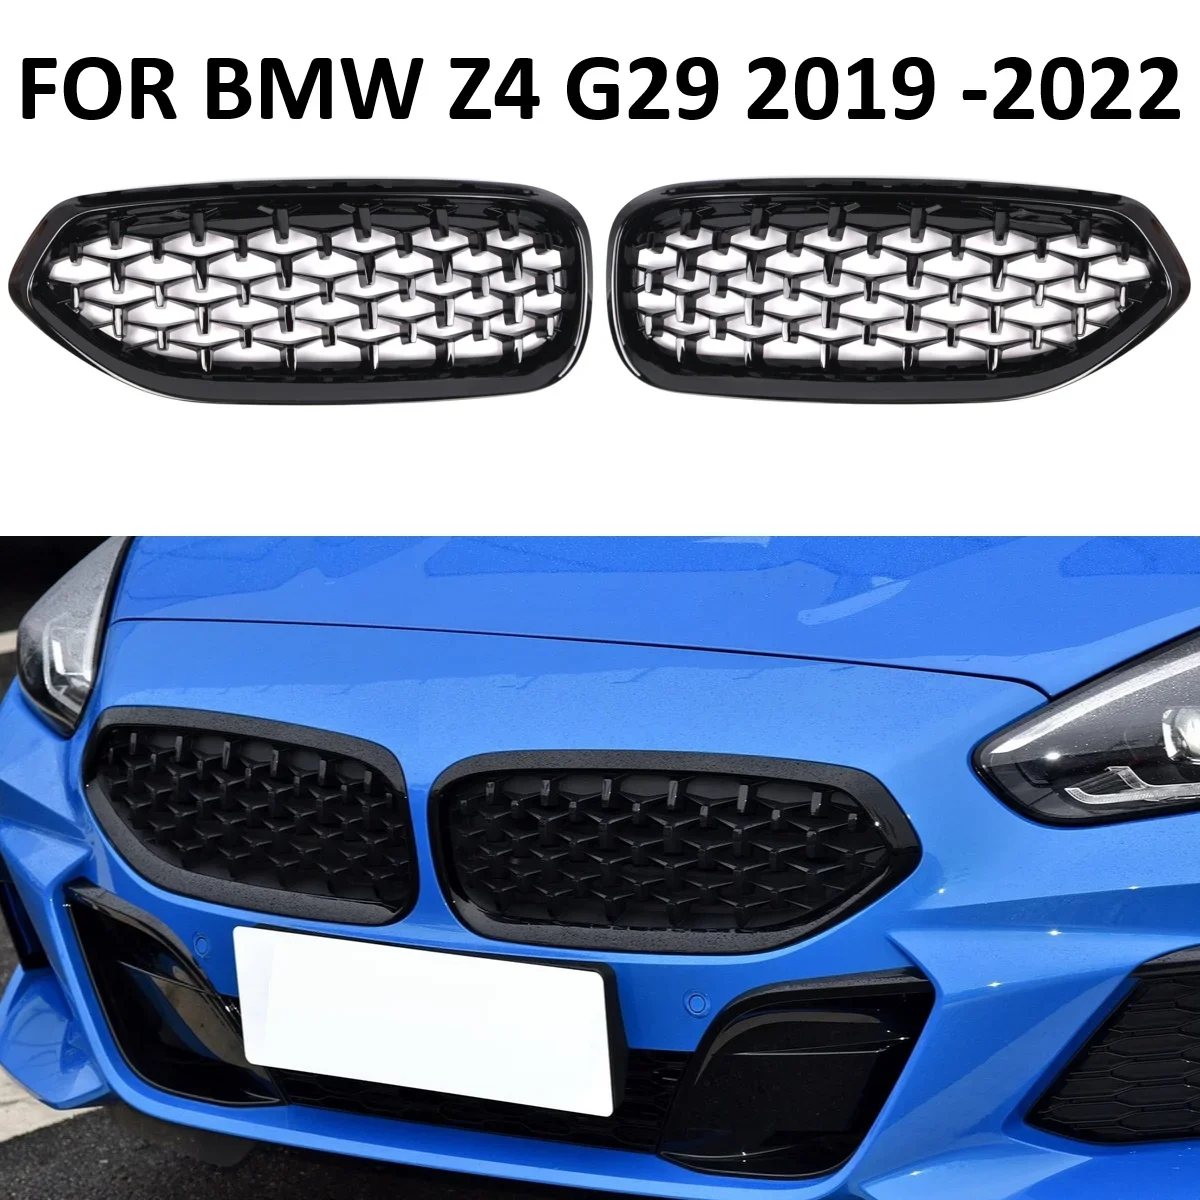 

Latest Style Diamond Gloss Black Car Front Kidney Grill Grille For BMW G29 Z4 2019 2020 2021 2022 2023 51138091295 51138091296